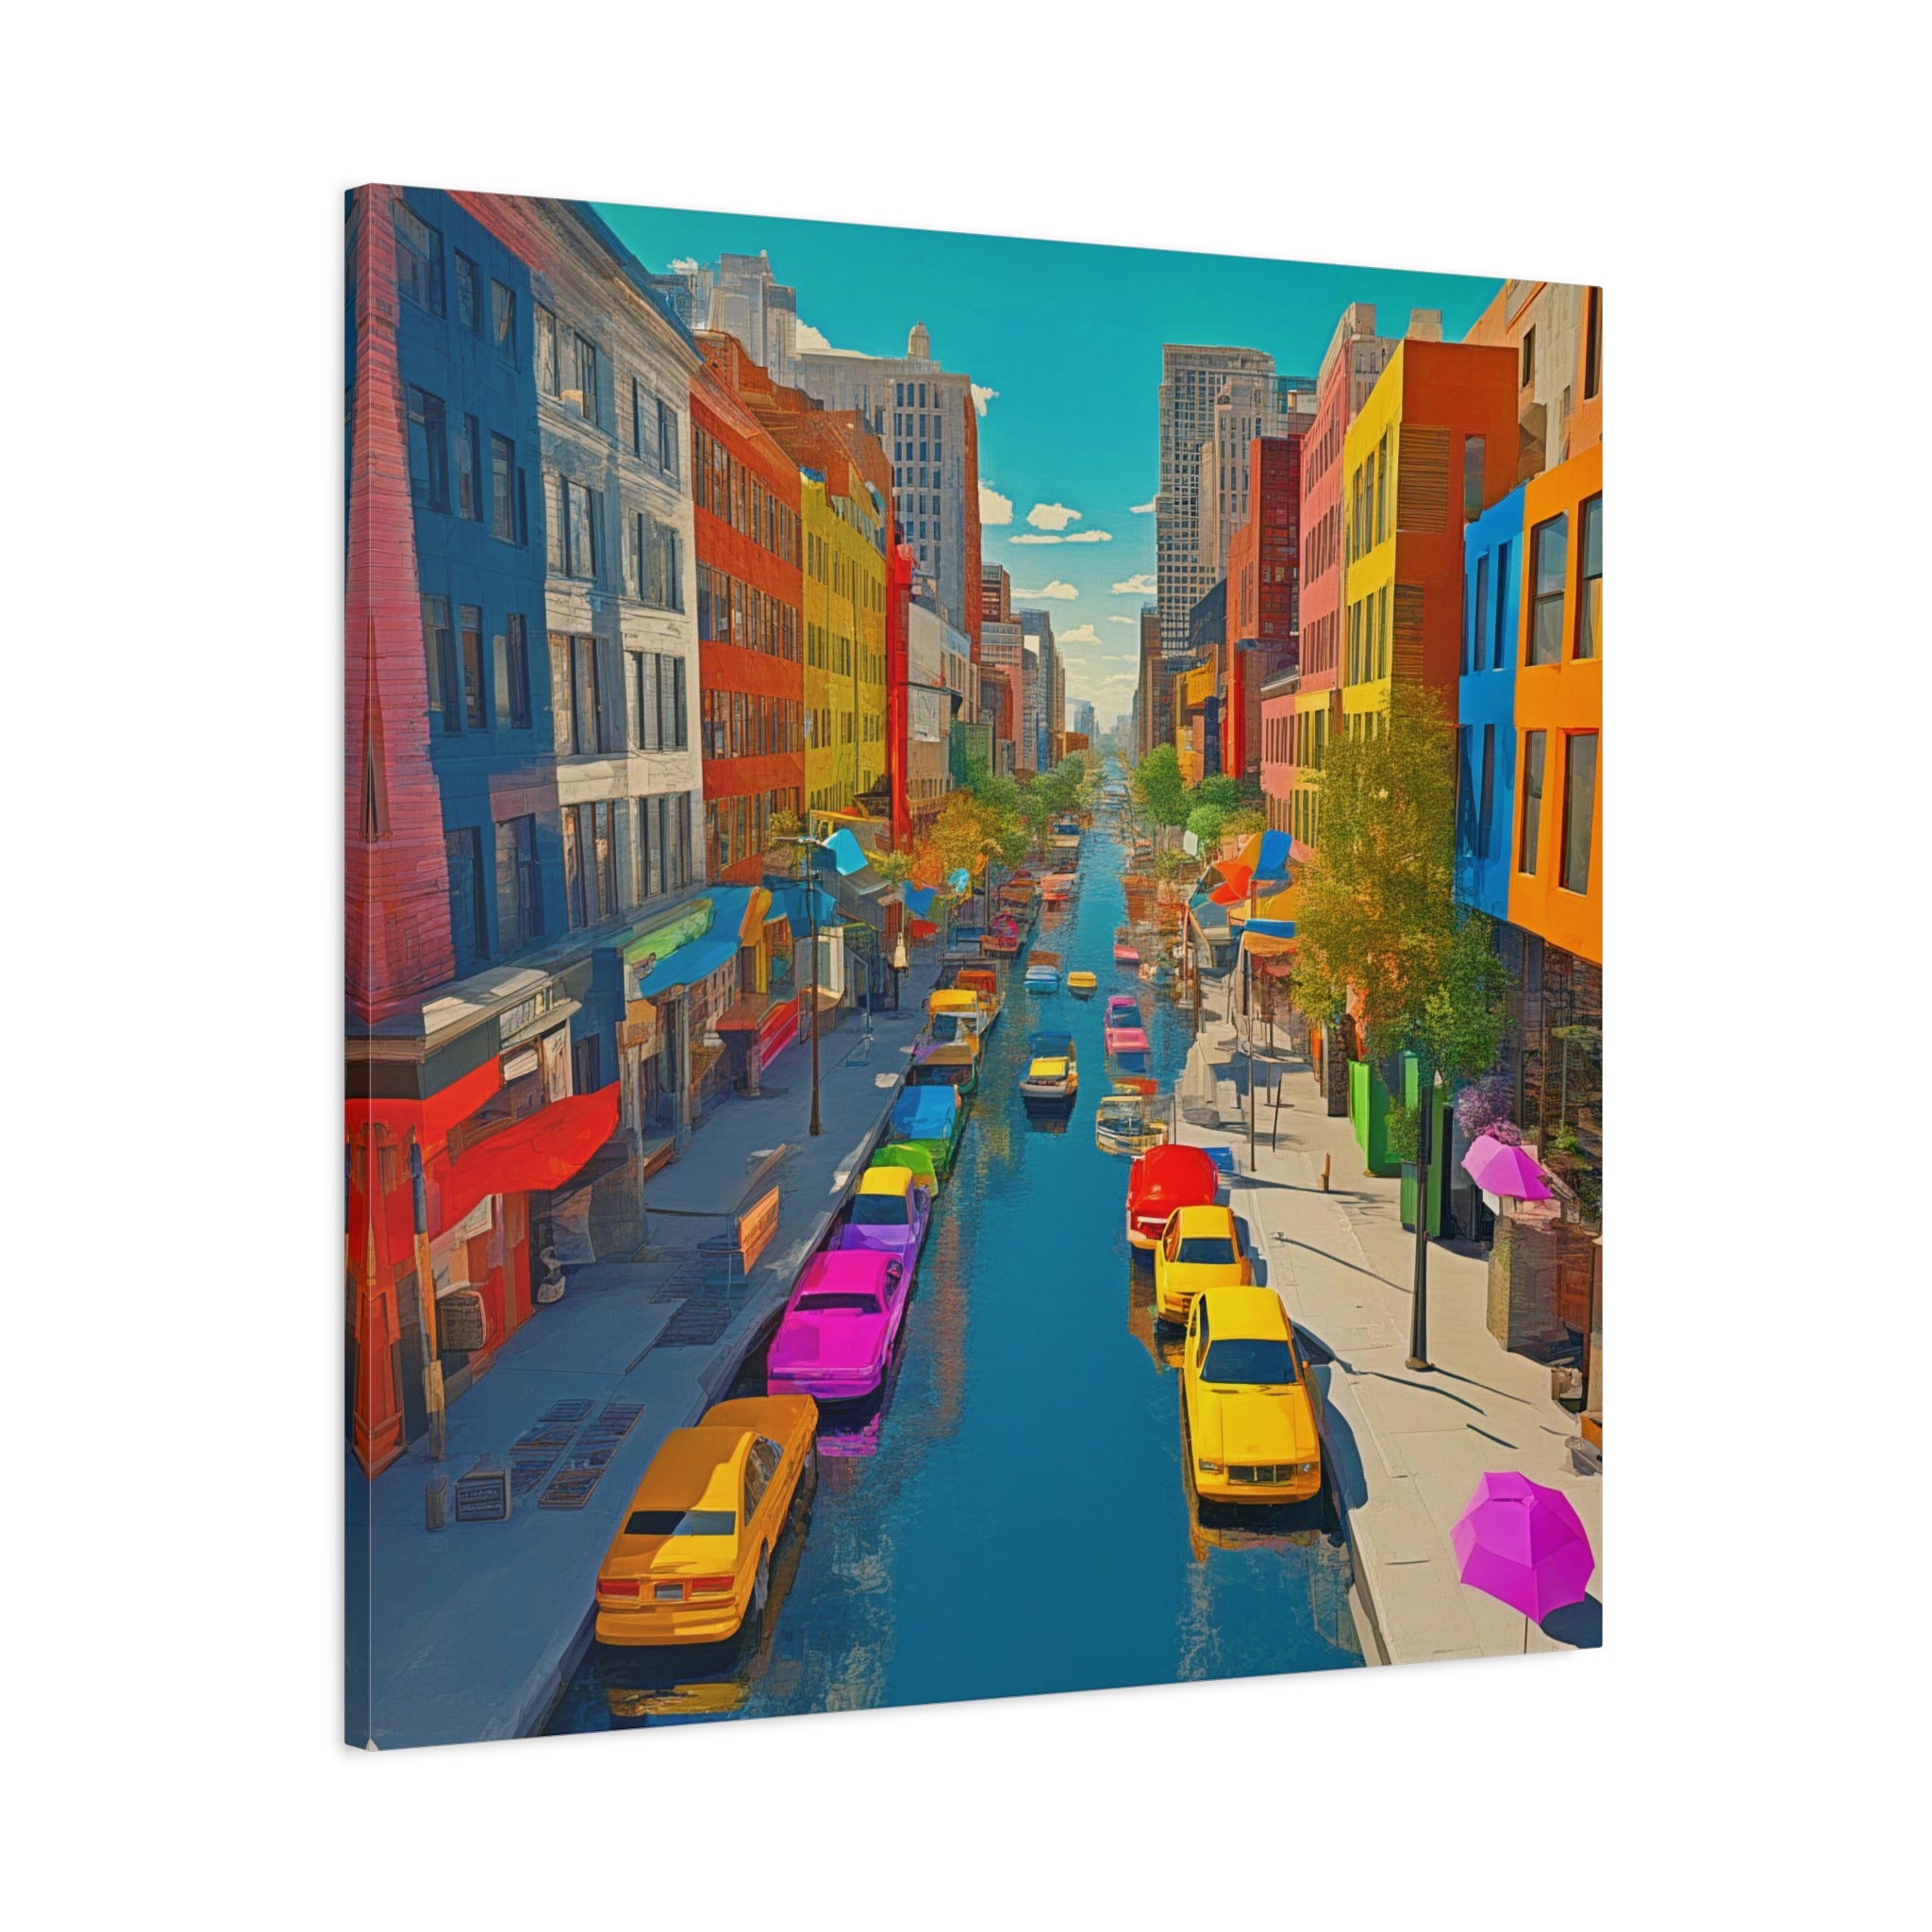 Wall Art DOWNTOWN Canvas Print Painting Giclee 32x32 GW Love Pop Art Beauty Design House  Home Office Decor Gift Ready to Hang